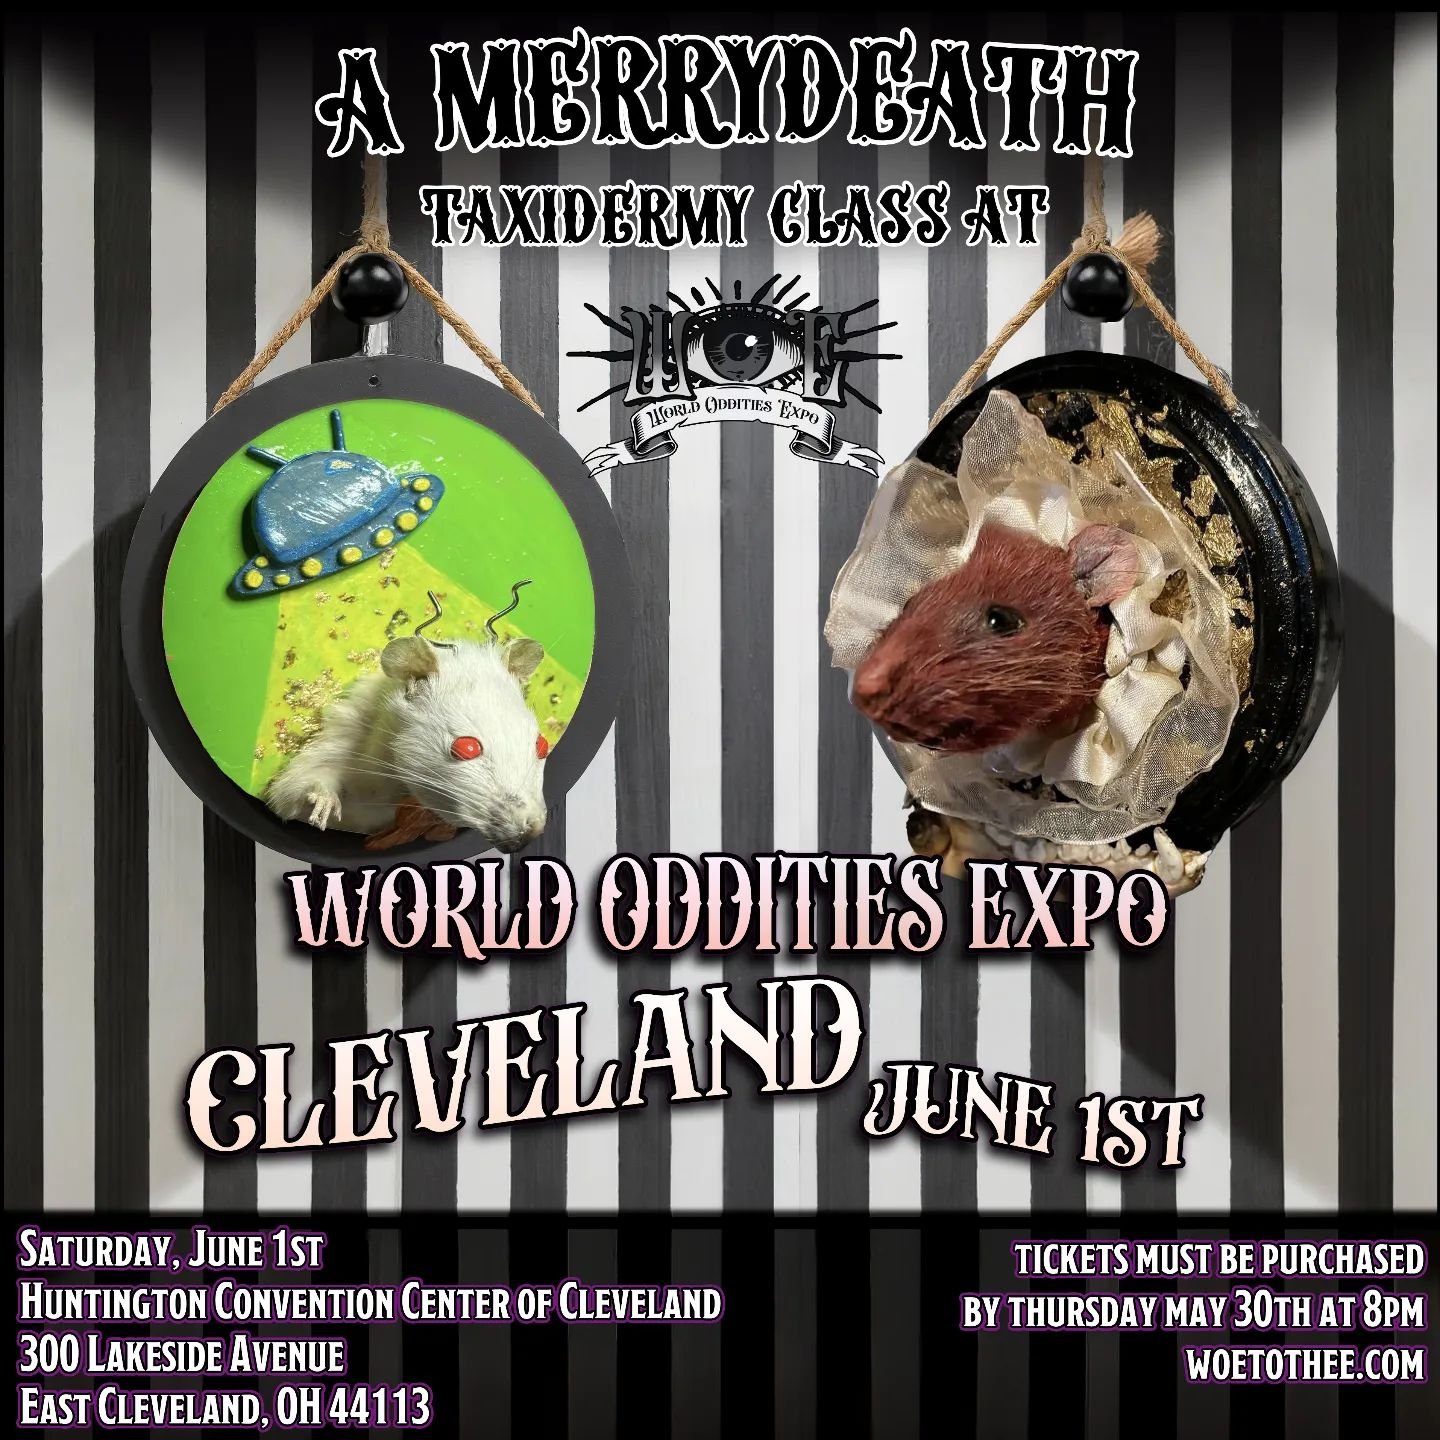 👁🐭 WOE CLEVELAND is proud to announce MERRYDEATH Taxidermy! 🥳👁
Learn taxidermy basics in a friendly environment and come home with a rat shoulder mount of your very own!
Taught by taxidermist Meredith Thomas, this class will offer students hands 